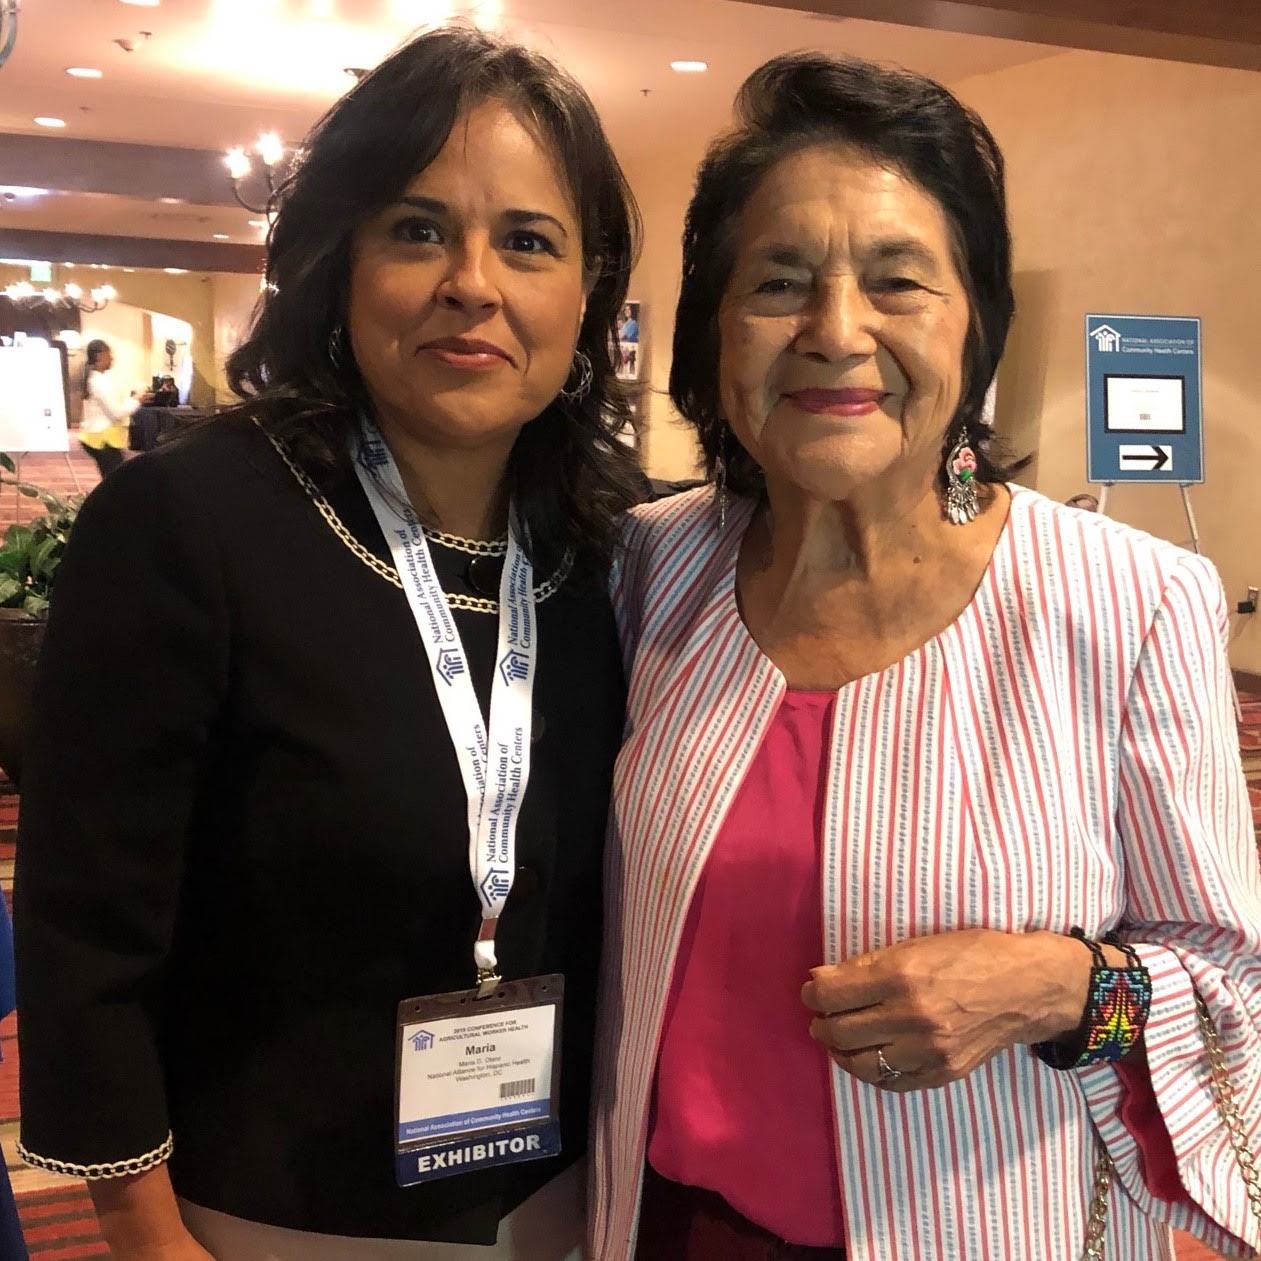 María Otero and Dolores Huerta smiling at the camera, standing next to each other. 